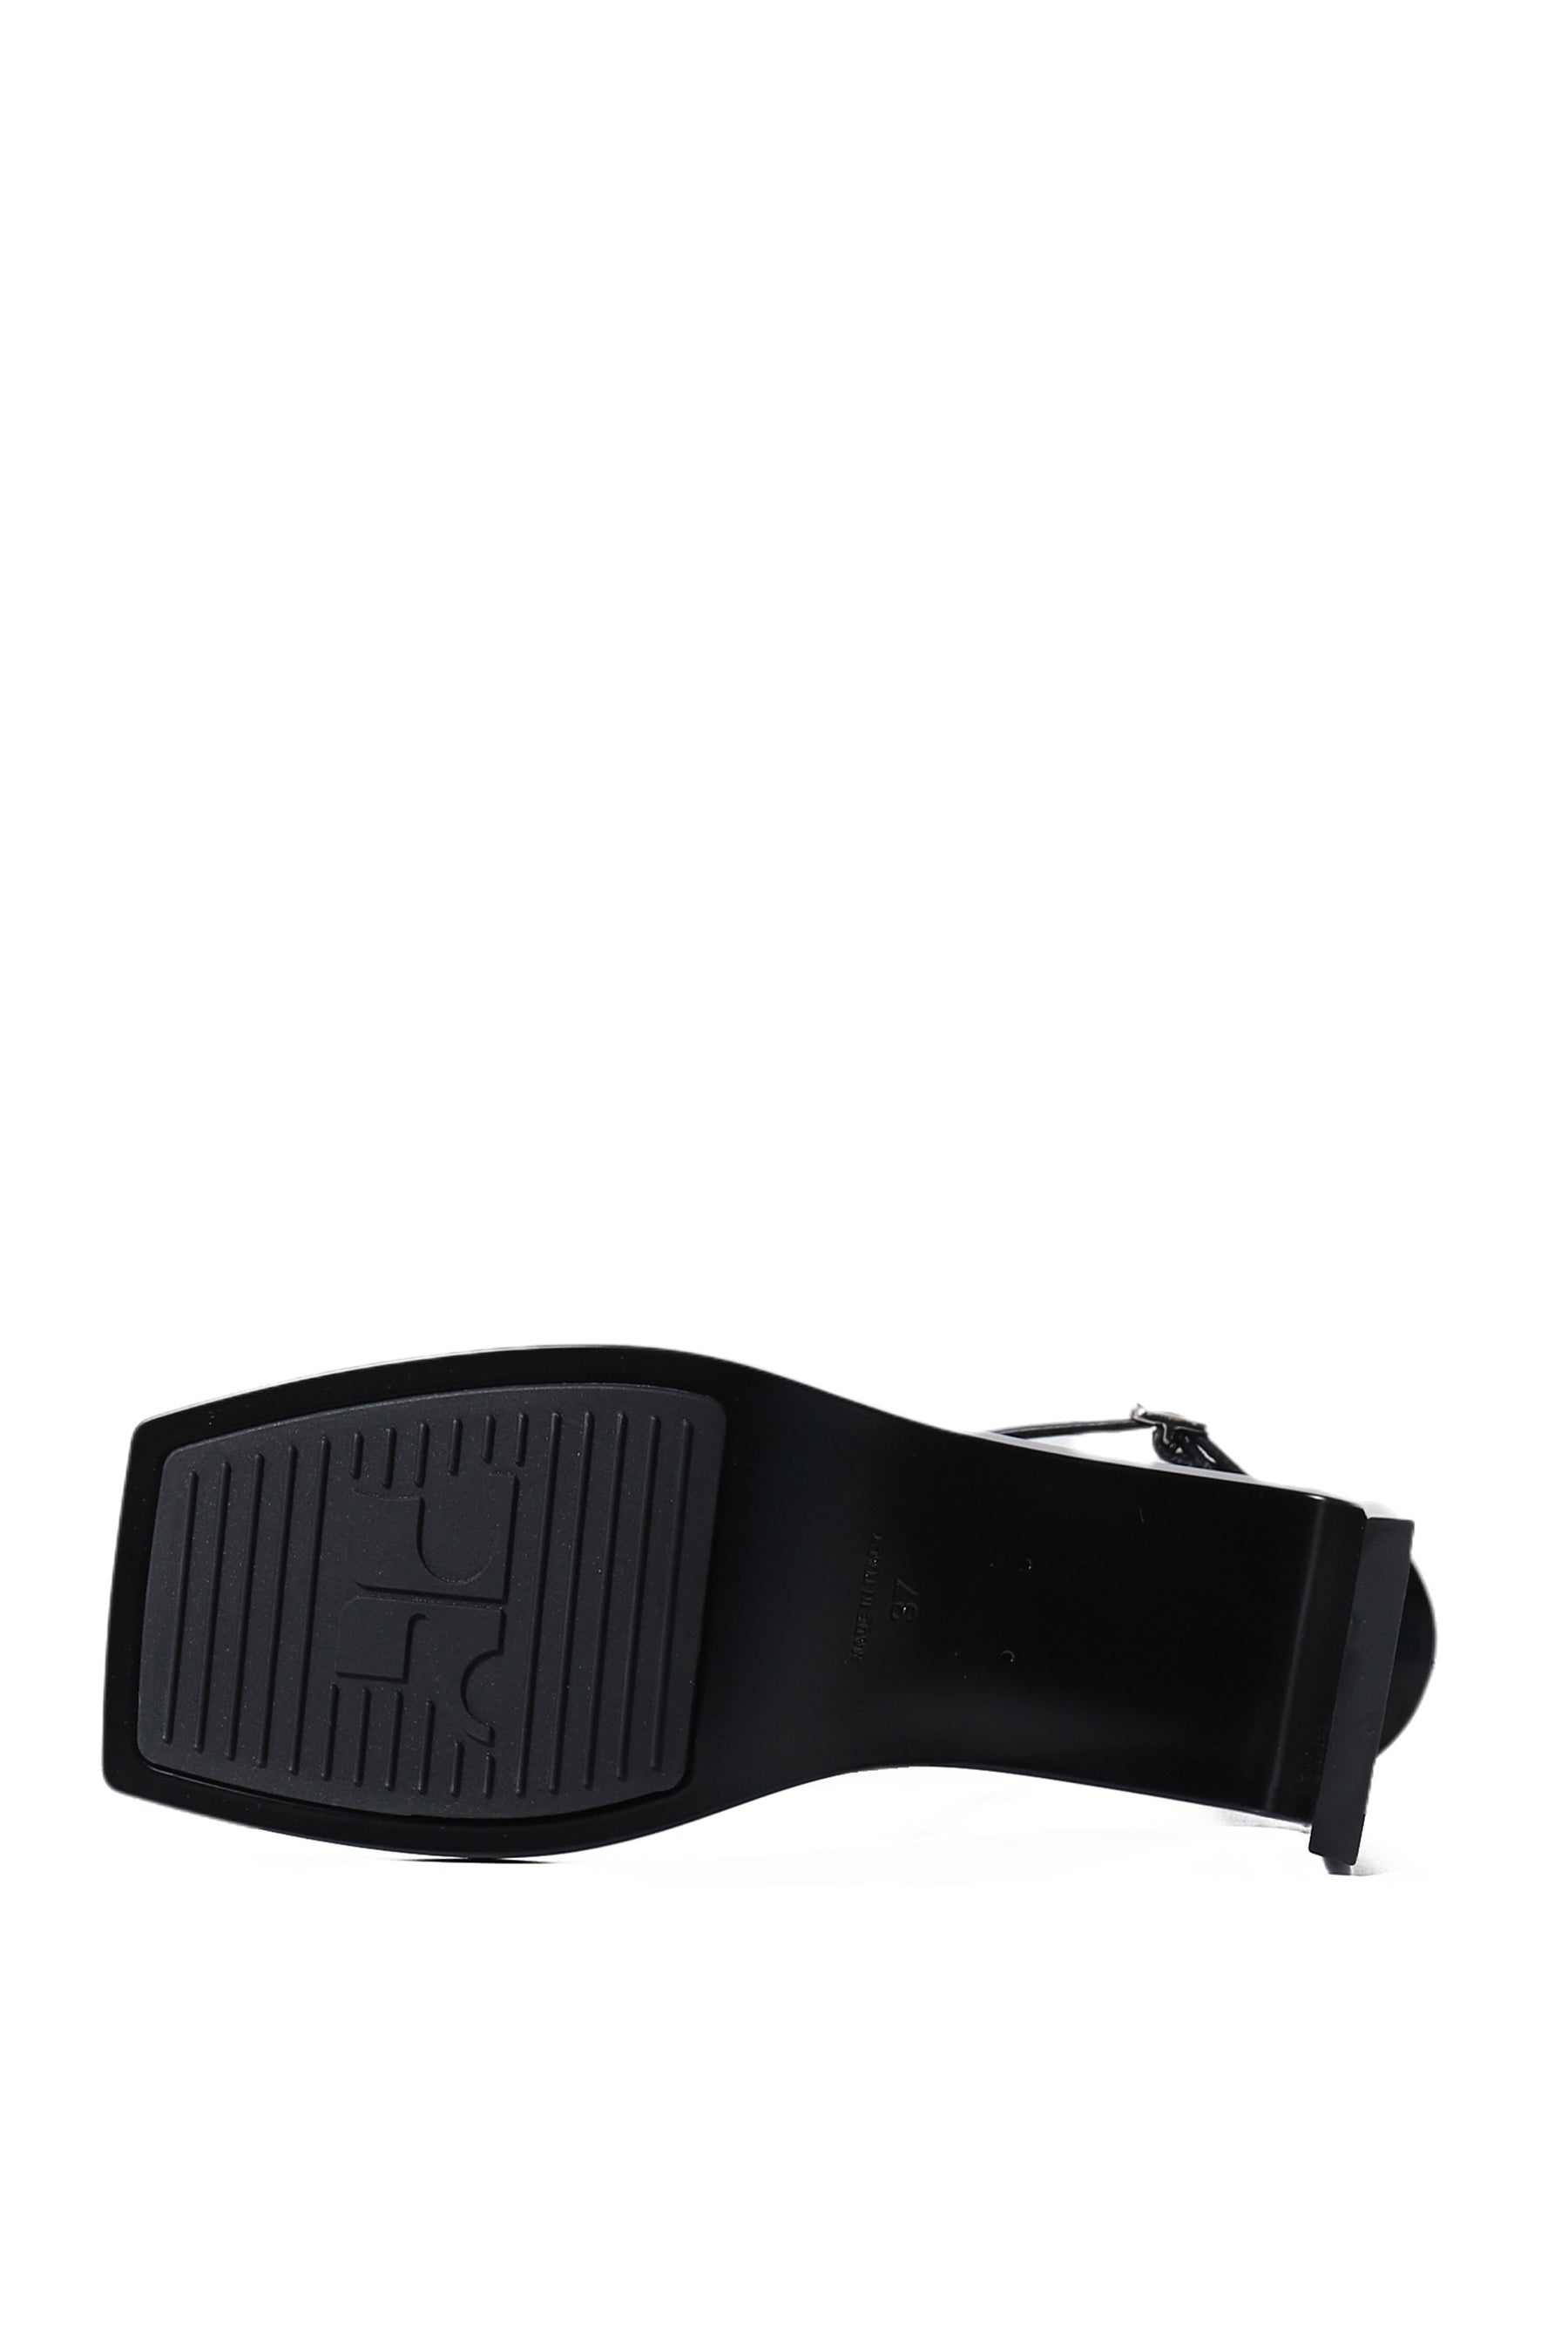 STREAM LEATHER SANDALS / BLK